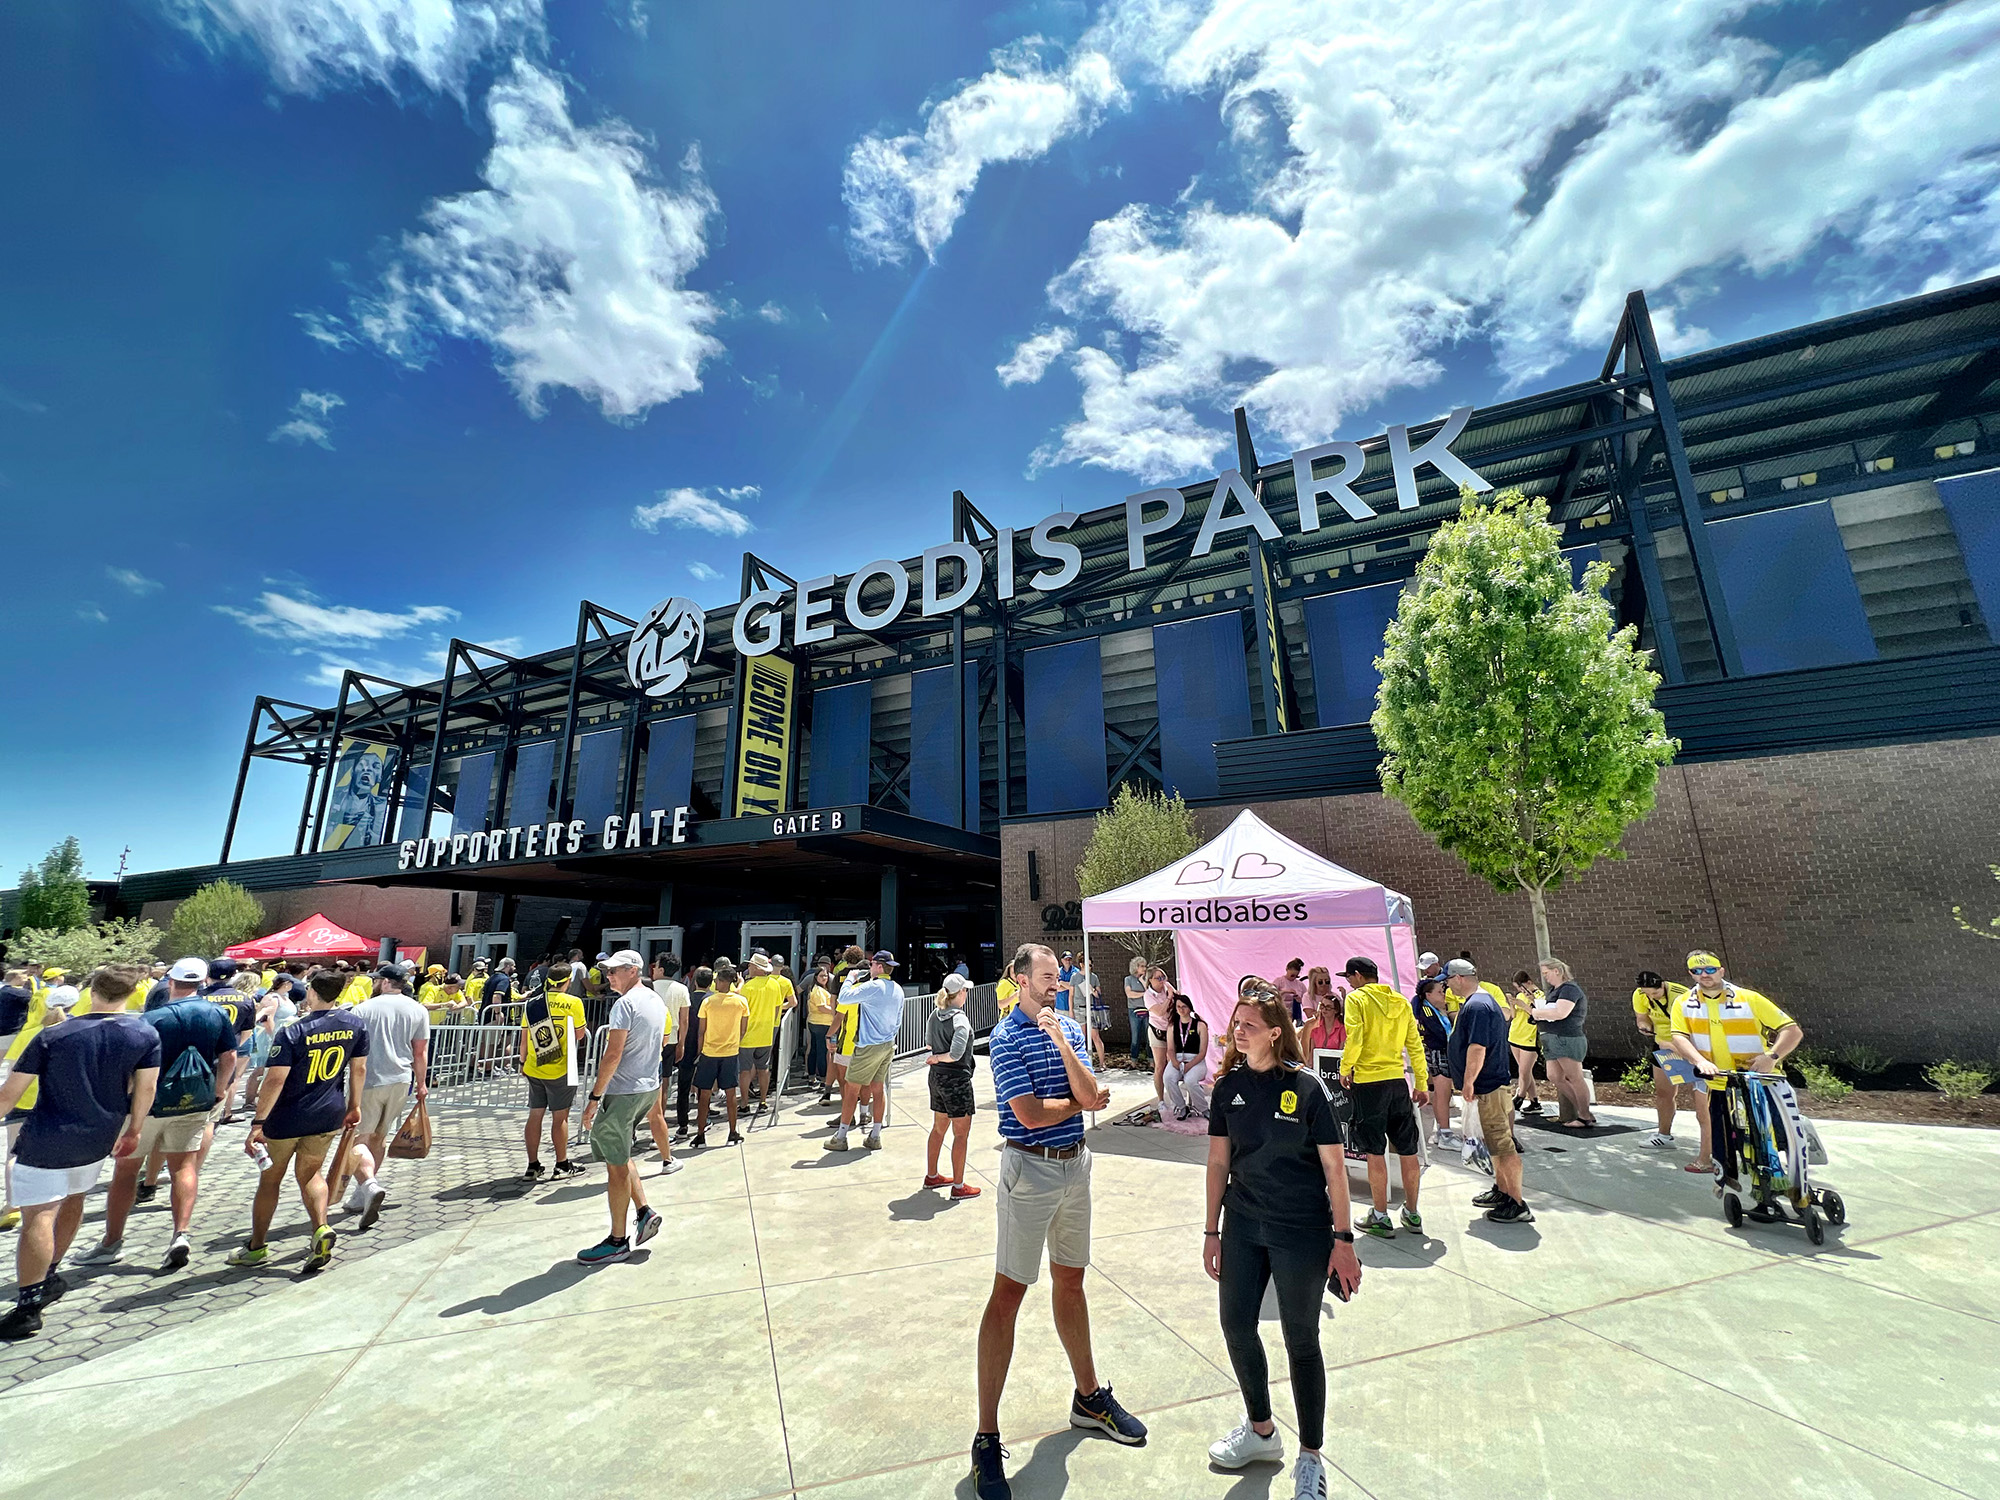 Stadium to feature wide variety of foods